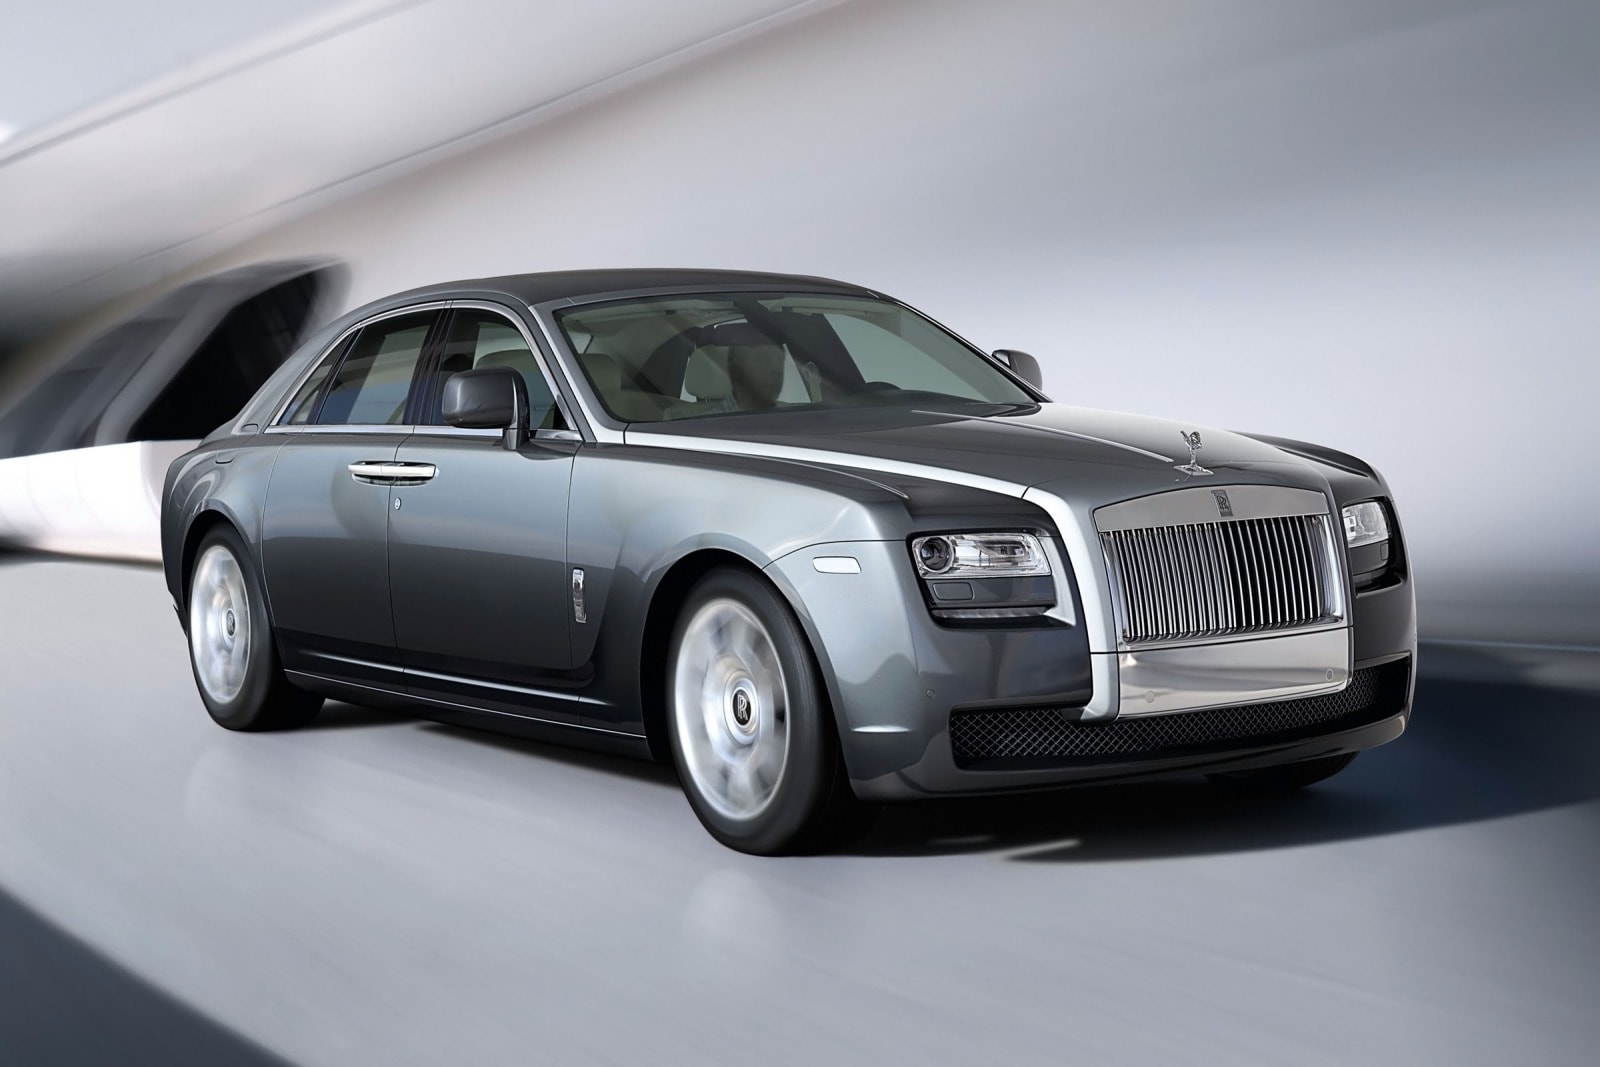 2012 Rolls-Royce Ghost Review & Ratings | Edmunds